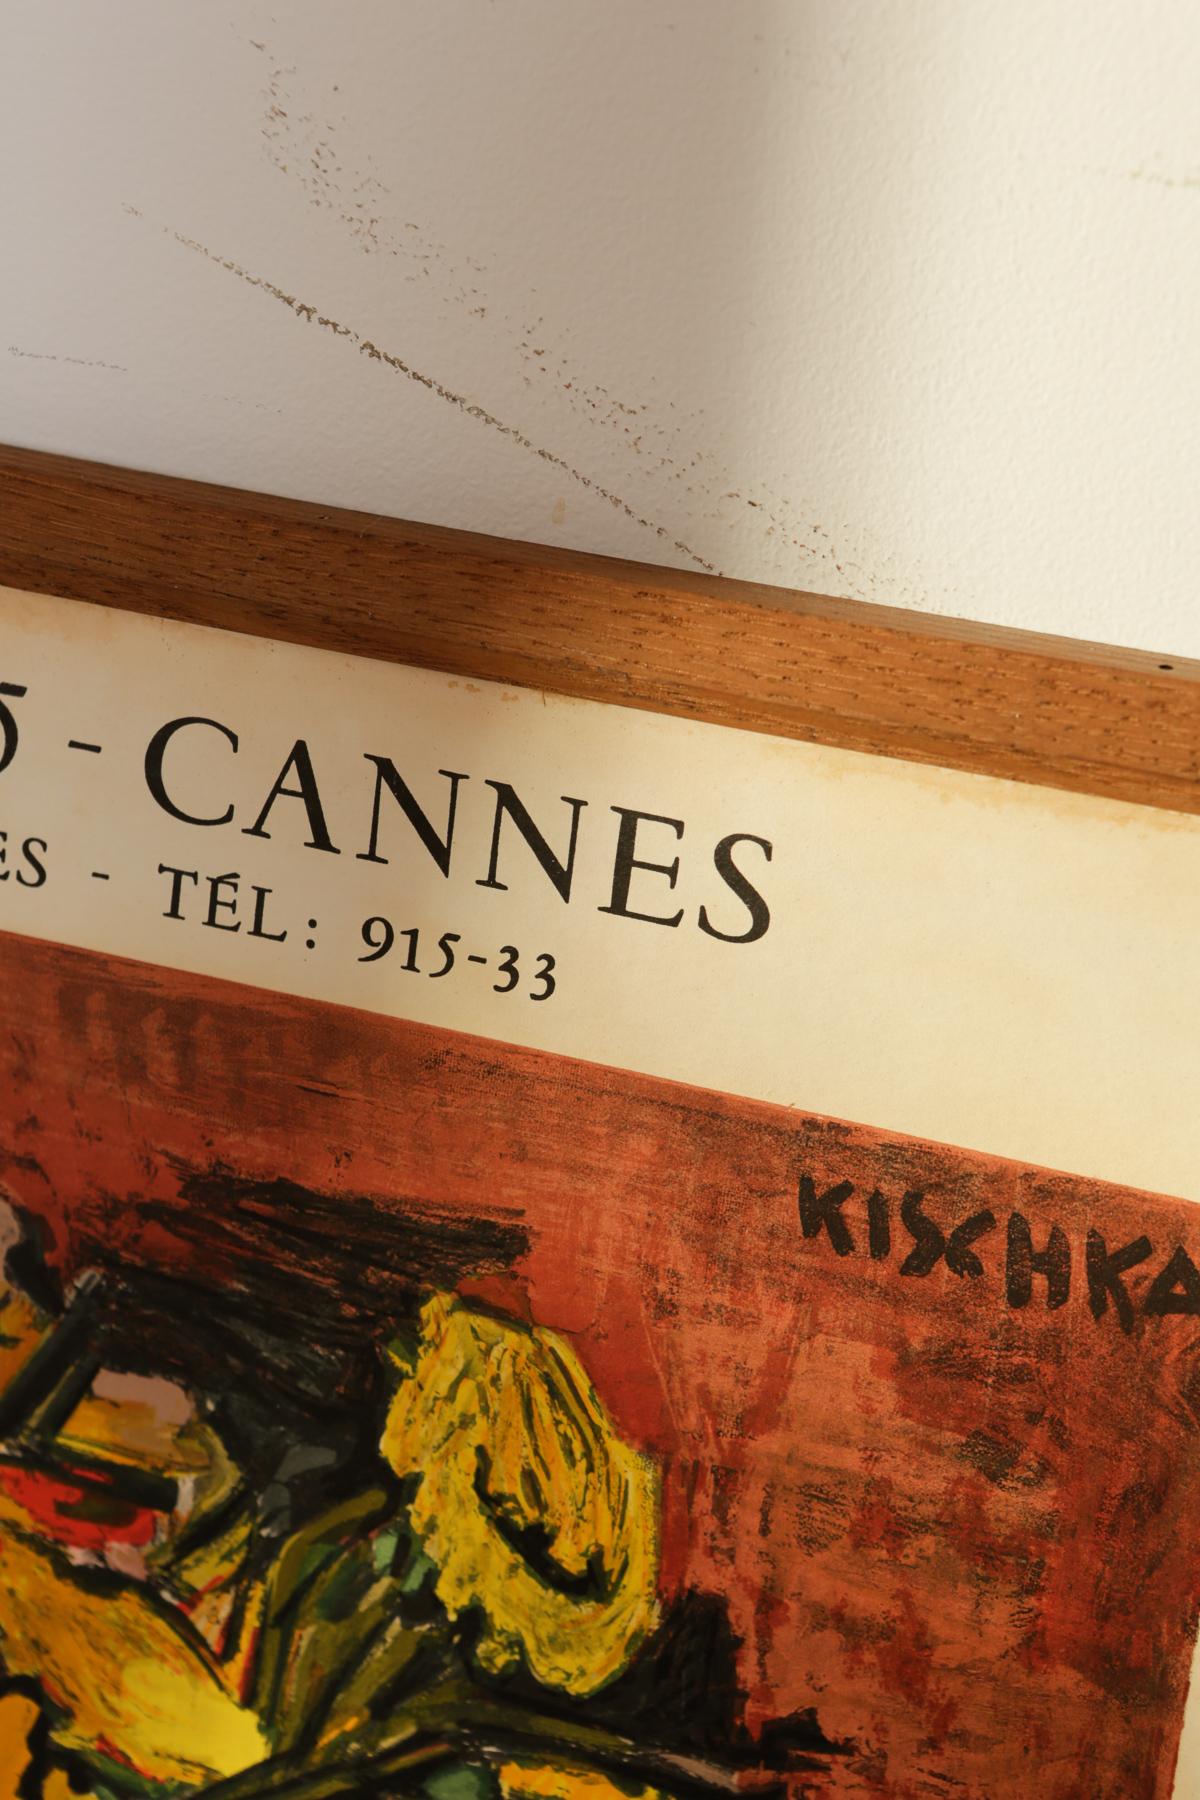 Mid-20th Century Original Cannes 1960s Kischka Poster Framed in NY with Reclaimed Wood